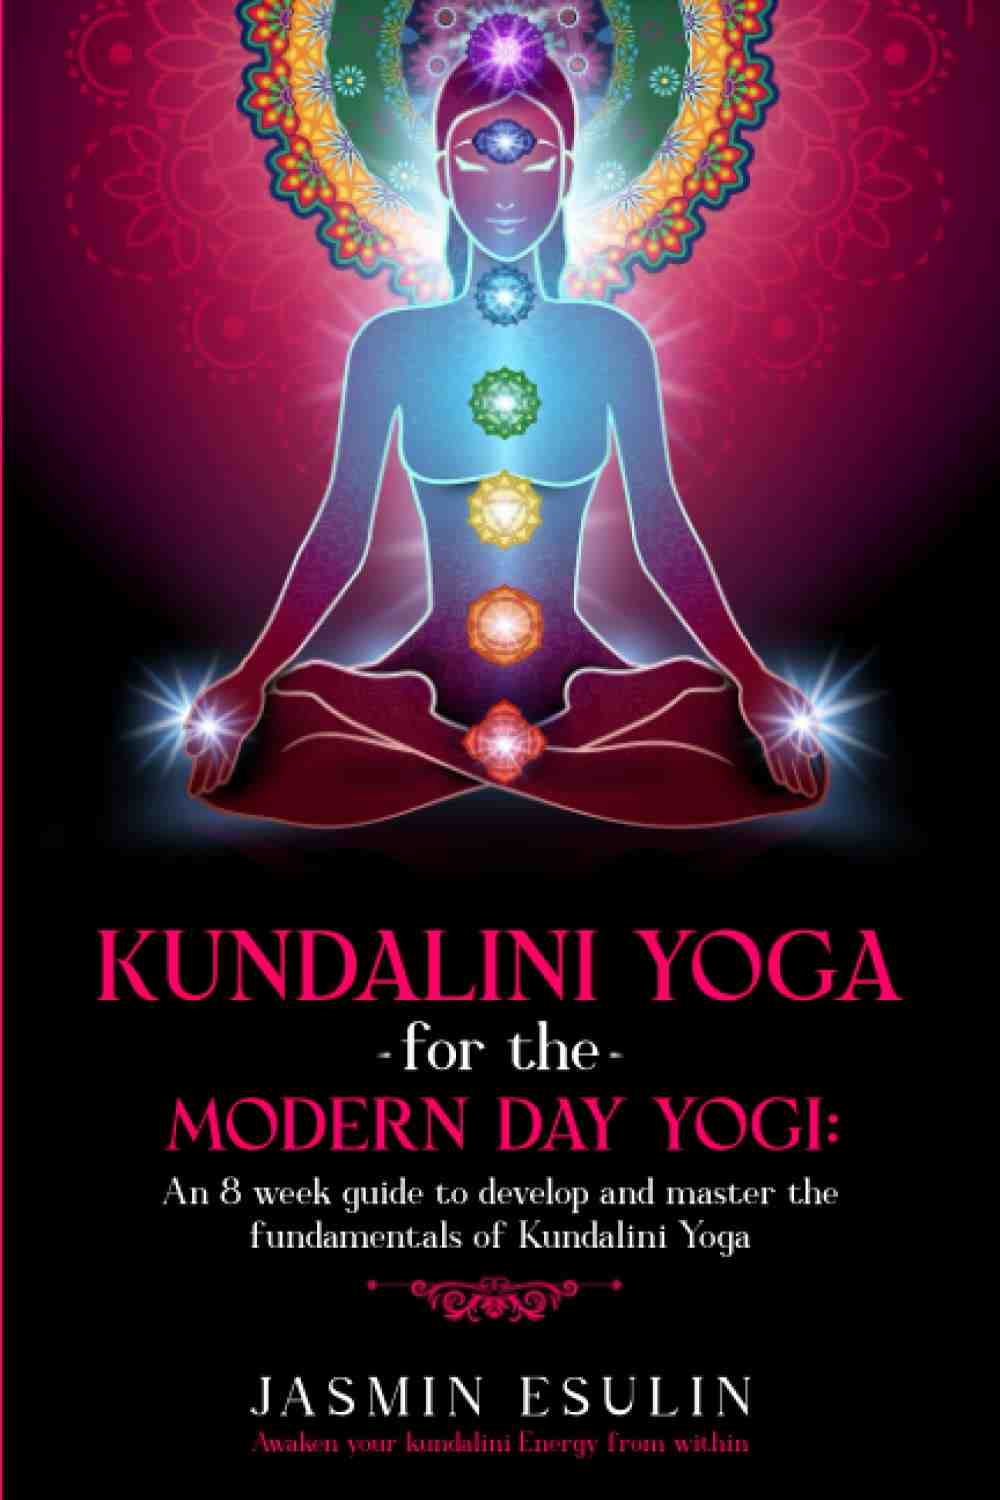 How is Kundalini Yoga different from other yoga?